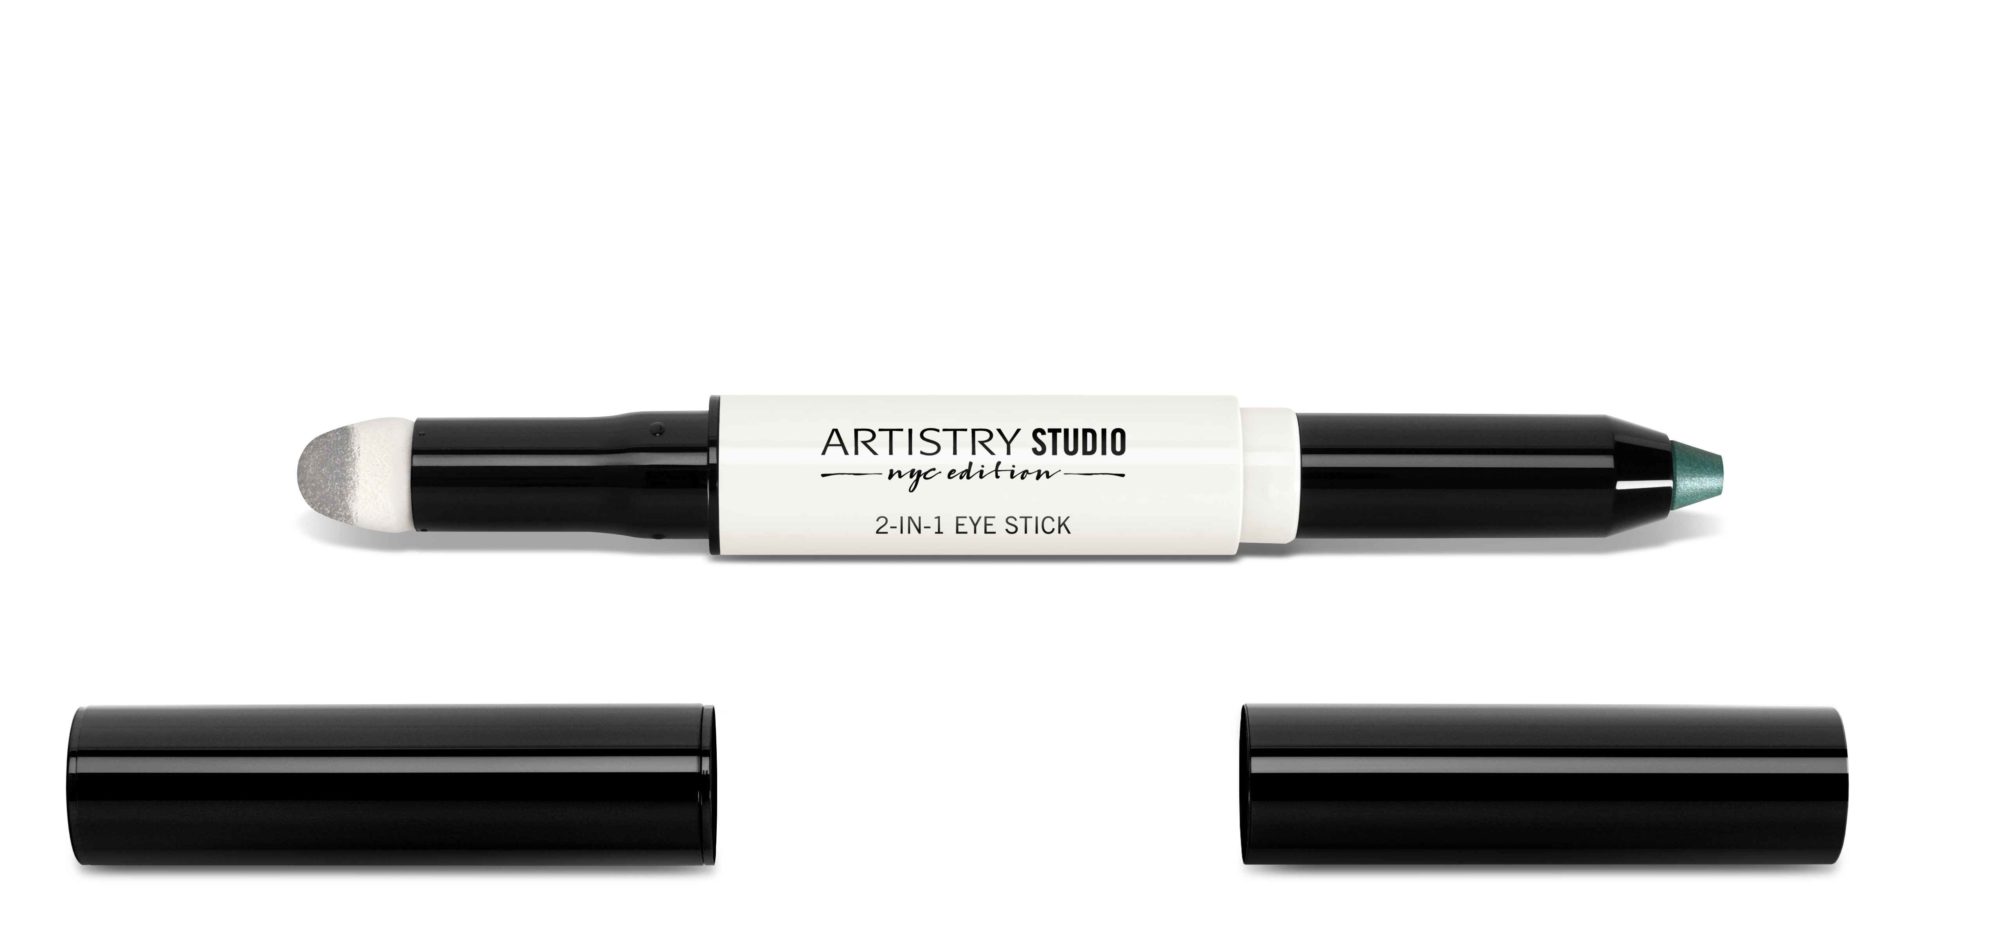 Artistry Studio NYC Edition 2-in-1 Eye Stick – Tribeca Teal